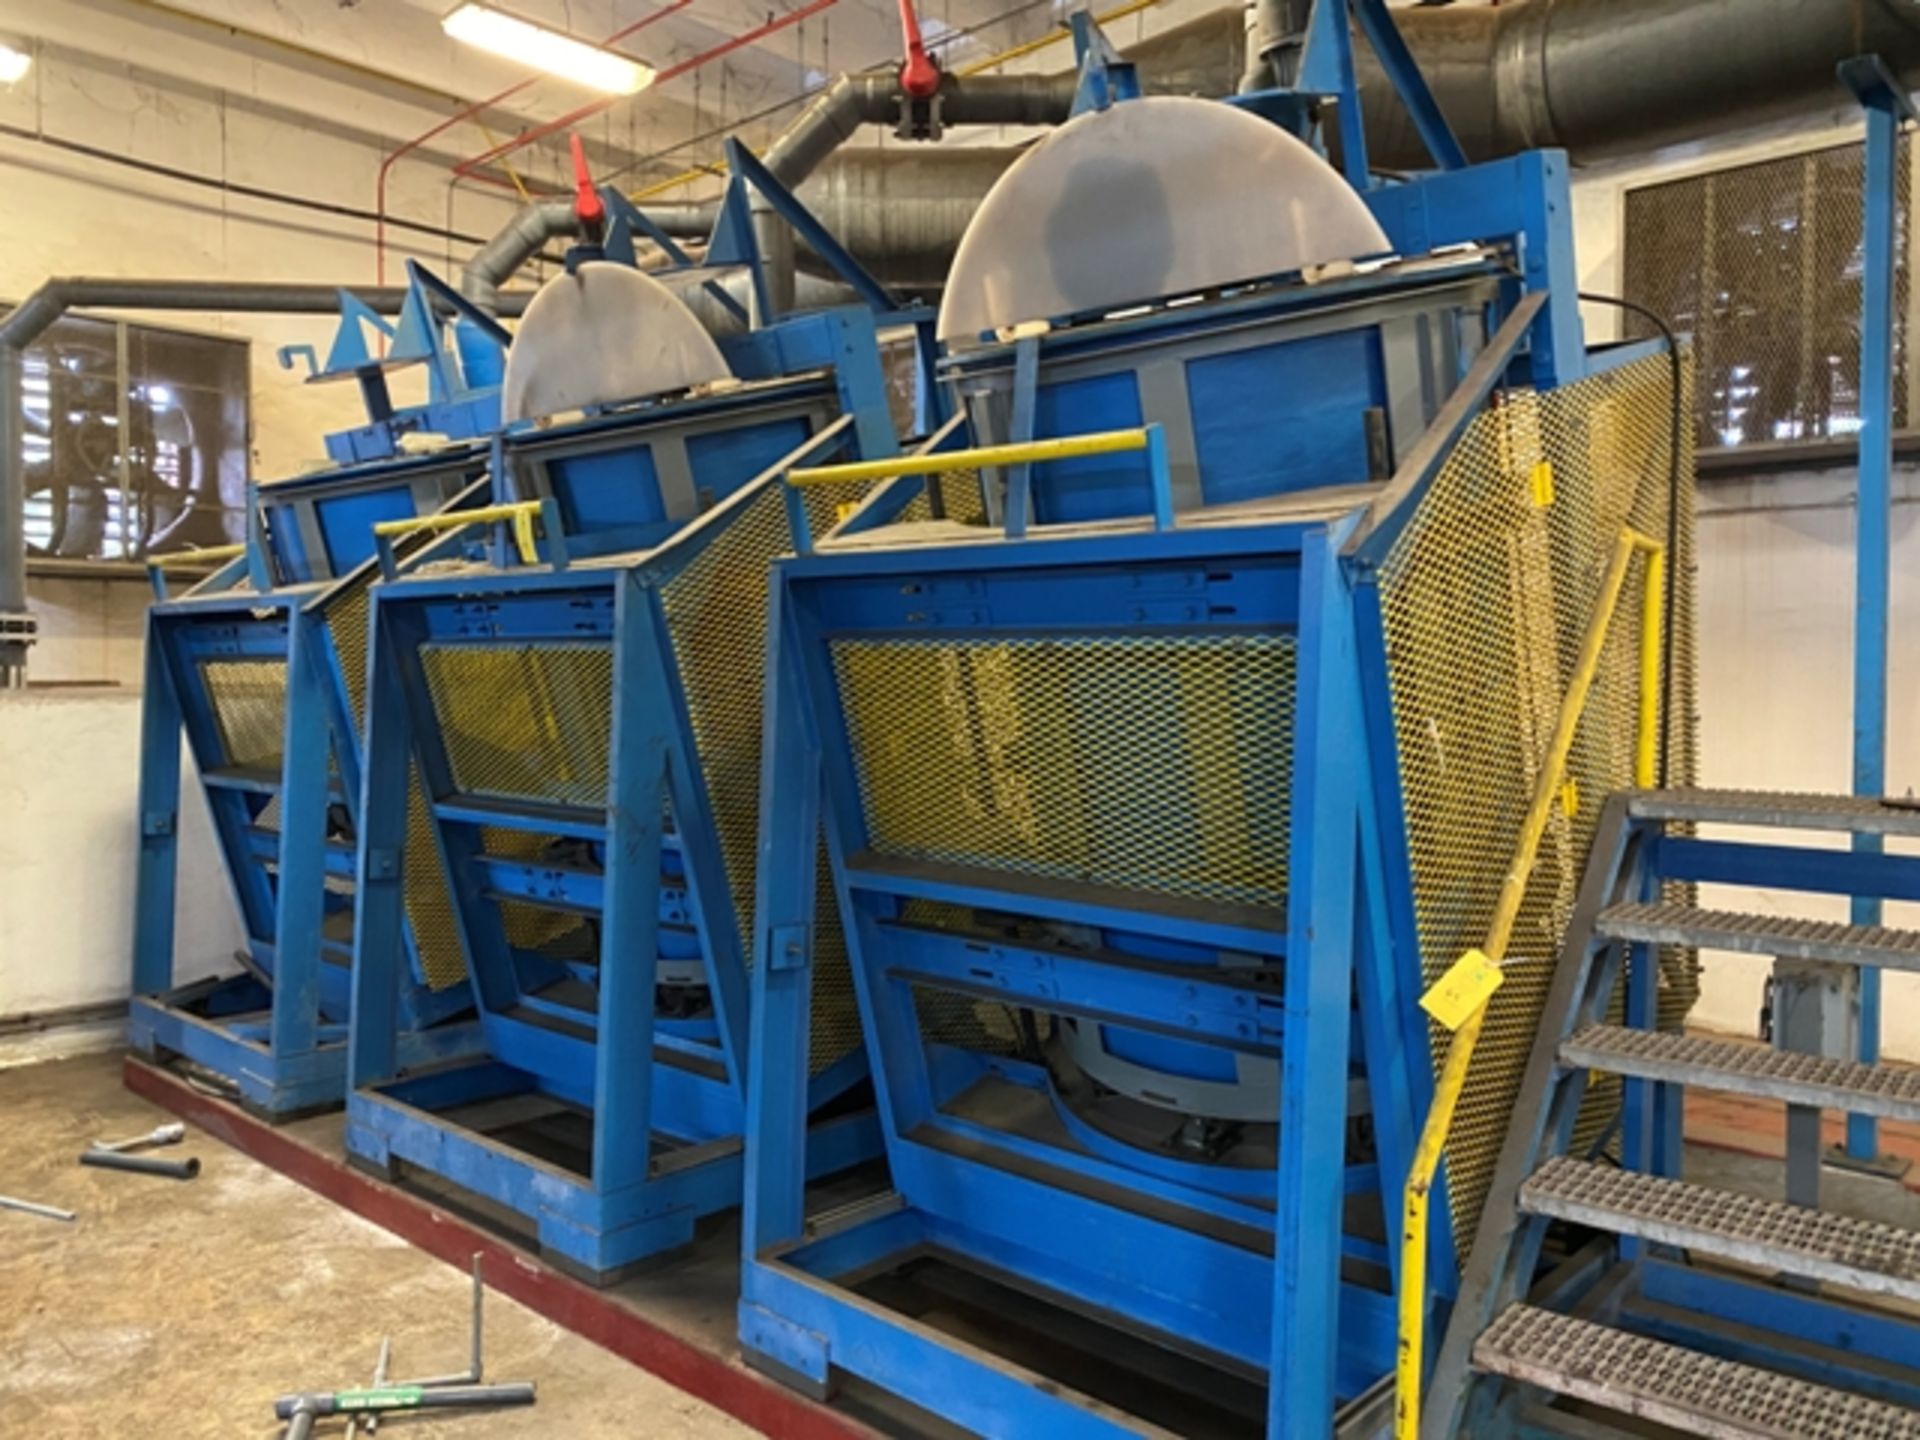 (3) Dumping Mixers (the tilting hinge on these units is currently broken) Rigging Price $4,000